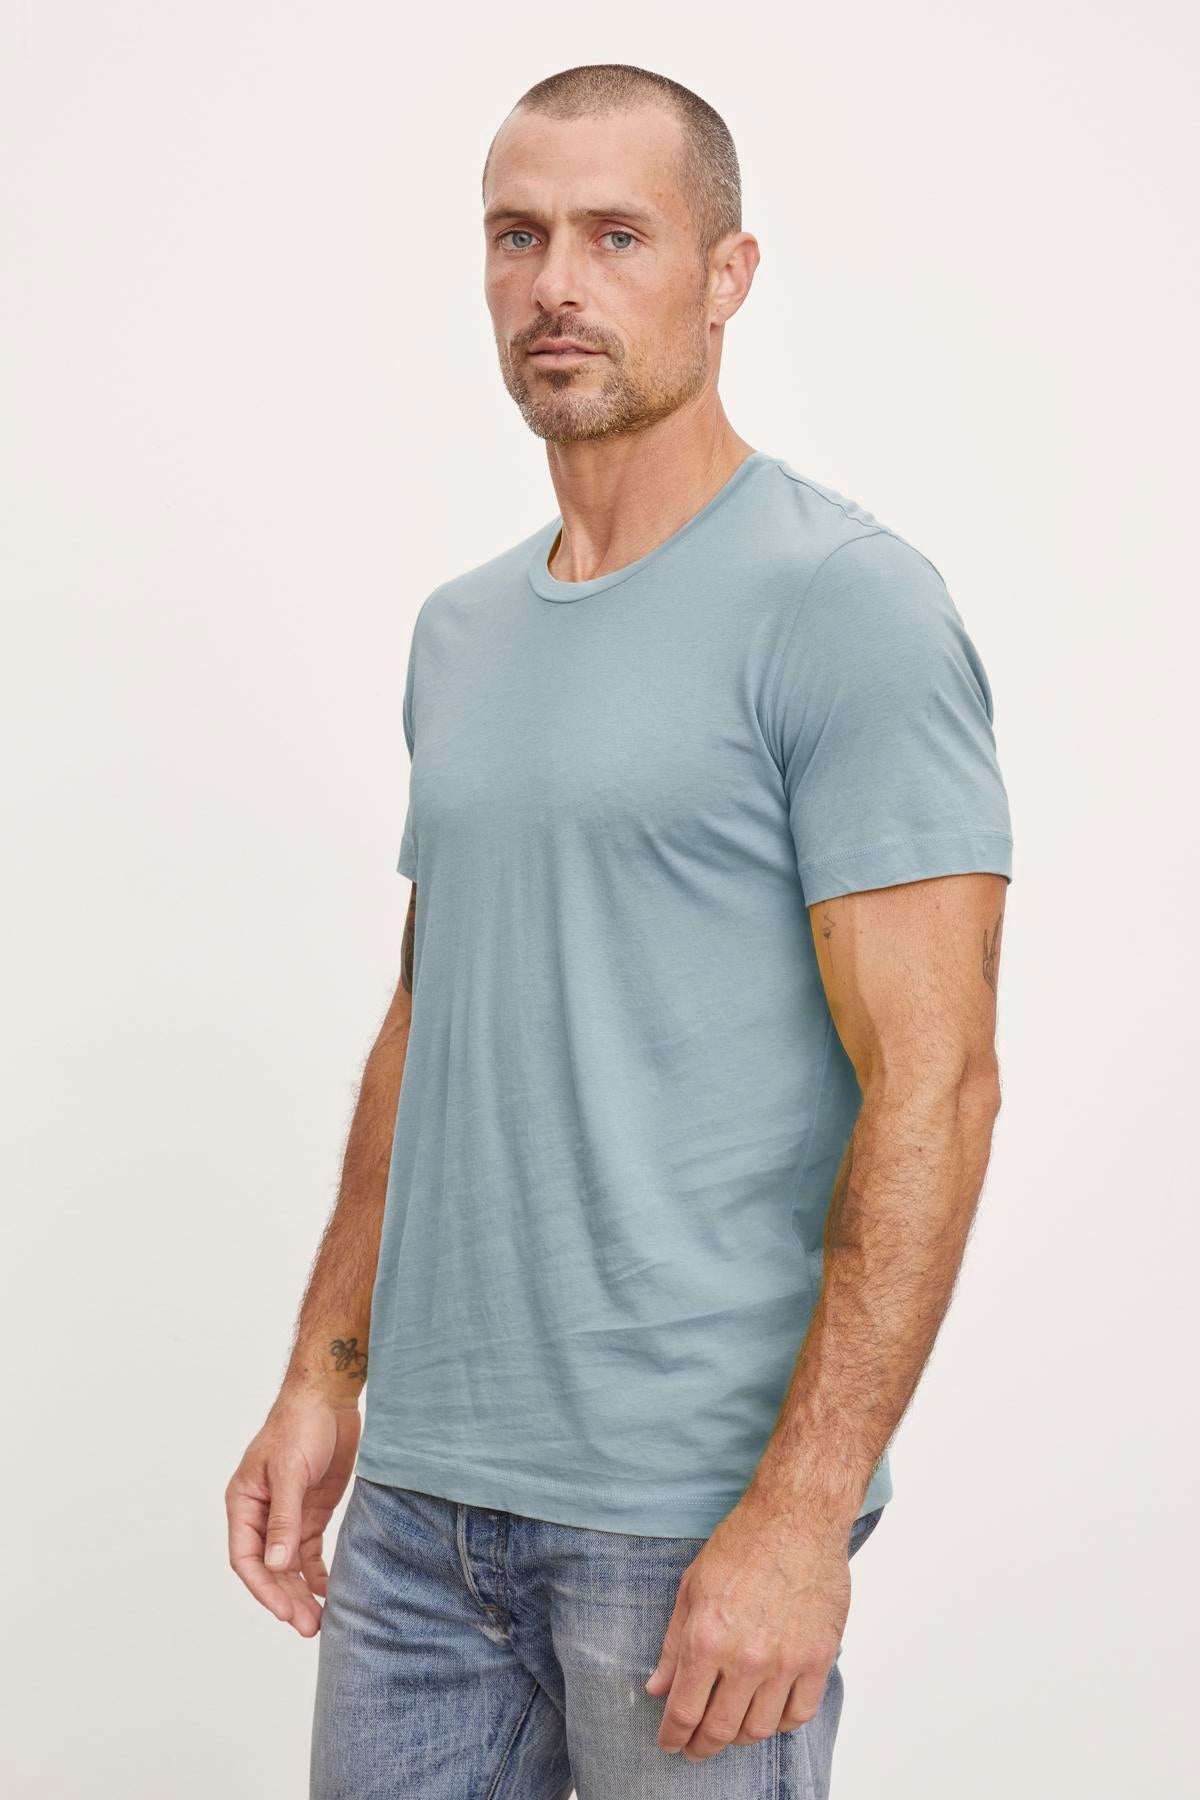 A man wearing a Velvet by Graham & Spencer Howard Whisper Classic Crew Neck Tee in blue and jeans.-36009113747649